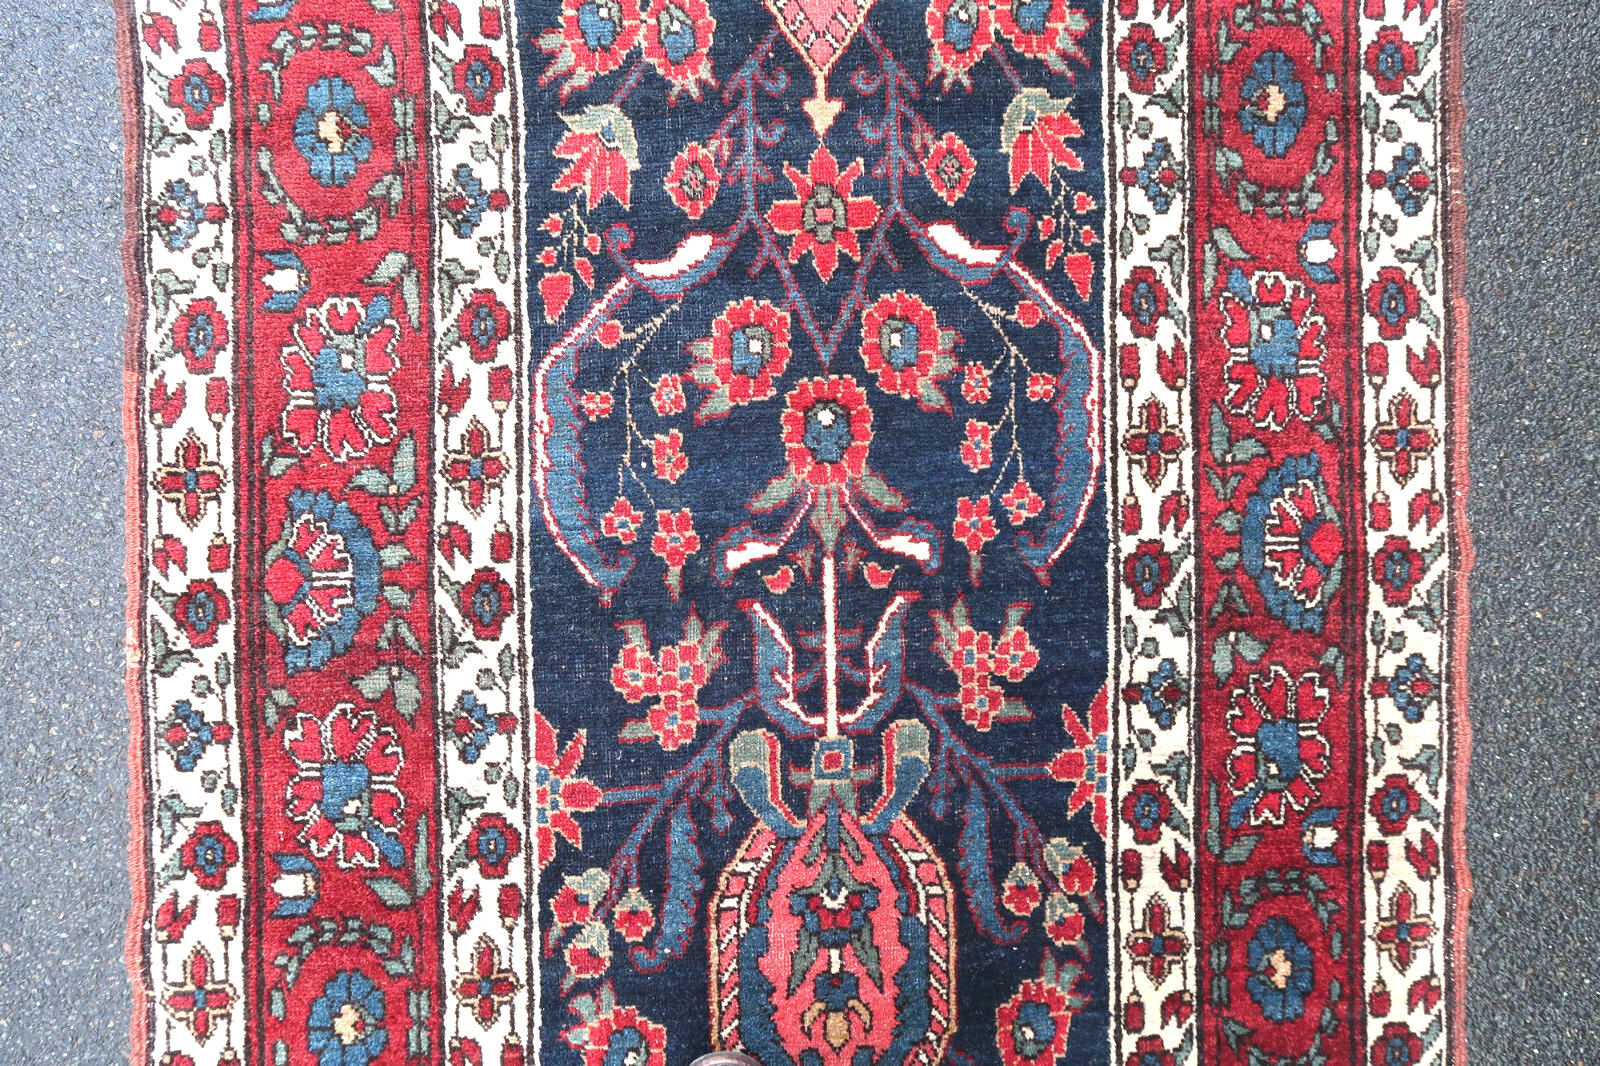 Handmade antique runner from North West in floral design and vegetable dyes. The rug is from the beginning of 20th century in original good condition.